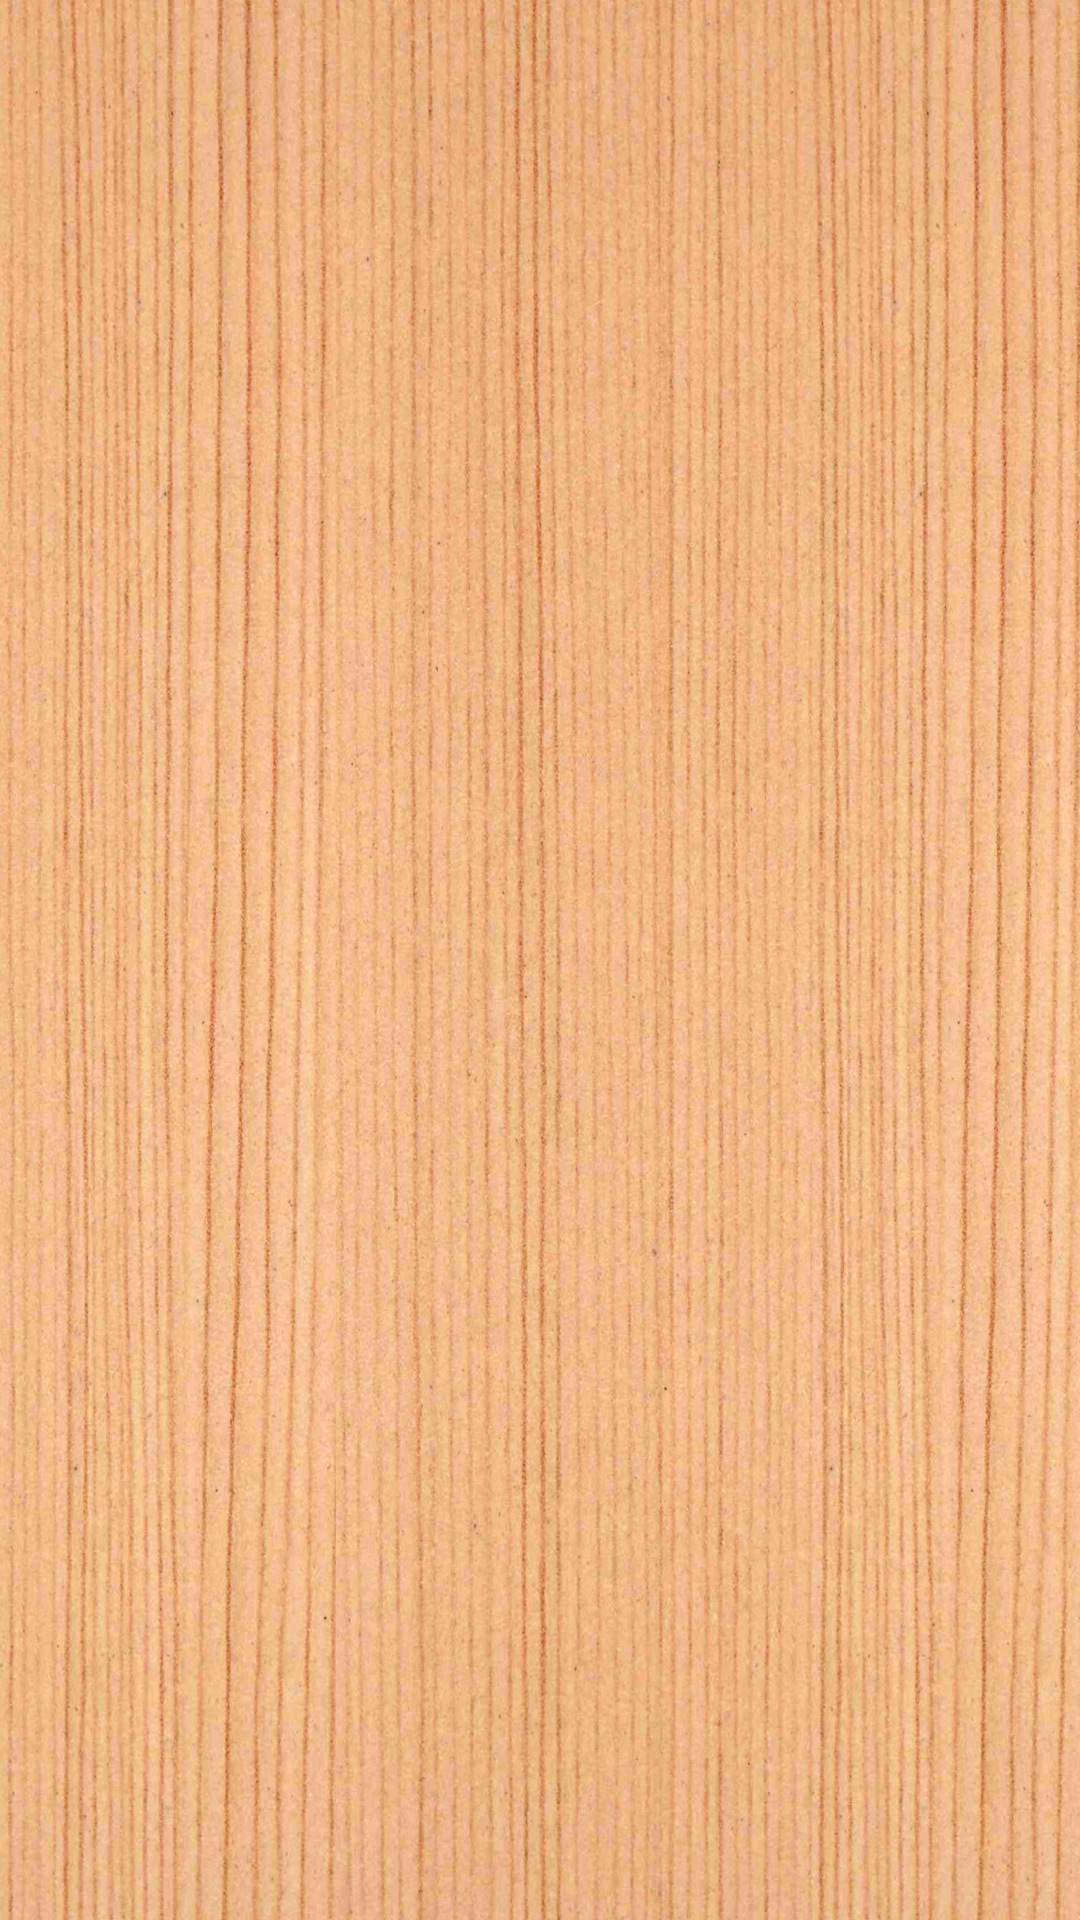 Wood Iphone8 Wallpapers Iphone Wallpapers